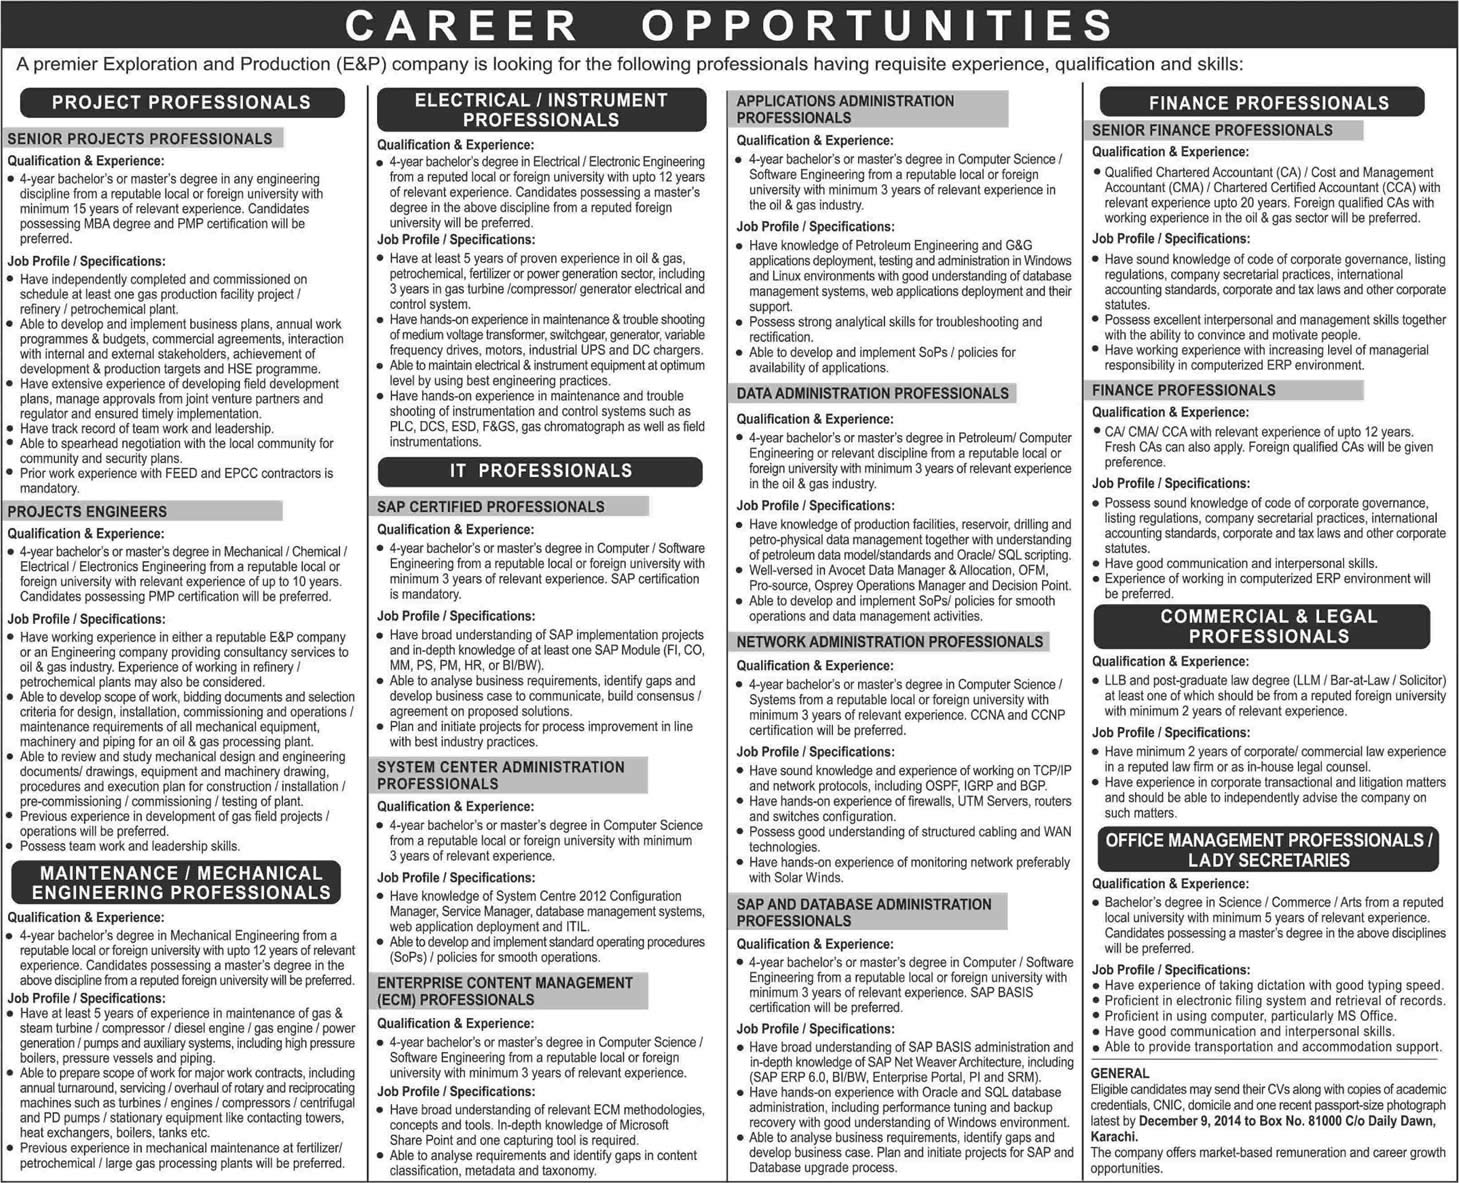 Oil and Gas Jobs in Pakistan November 2014 Exploration & Production (E&P) Company